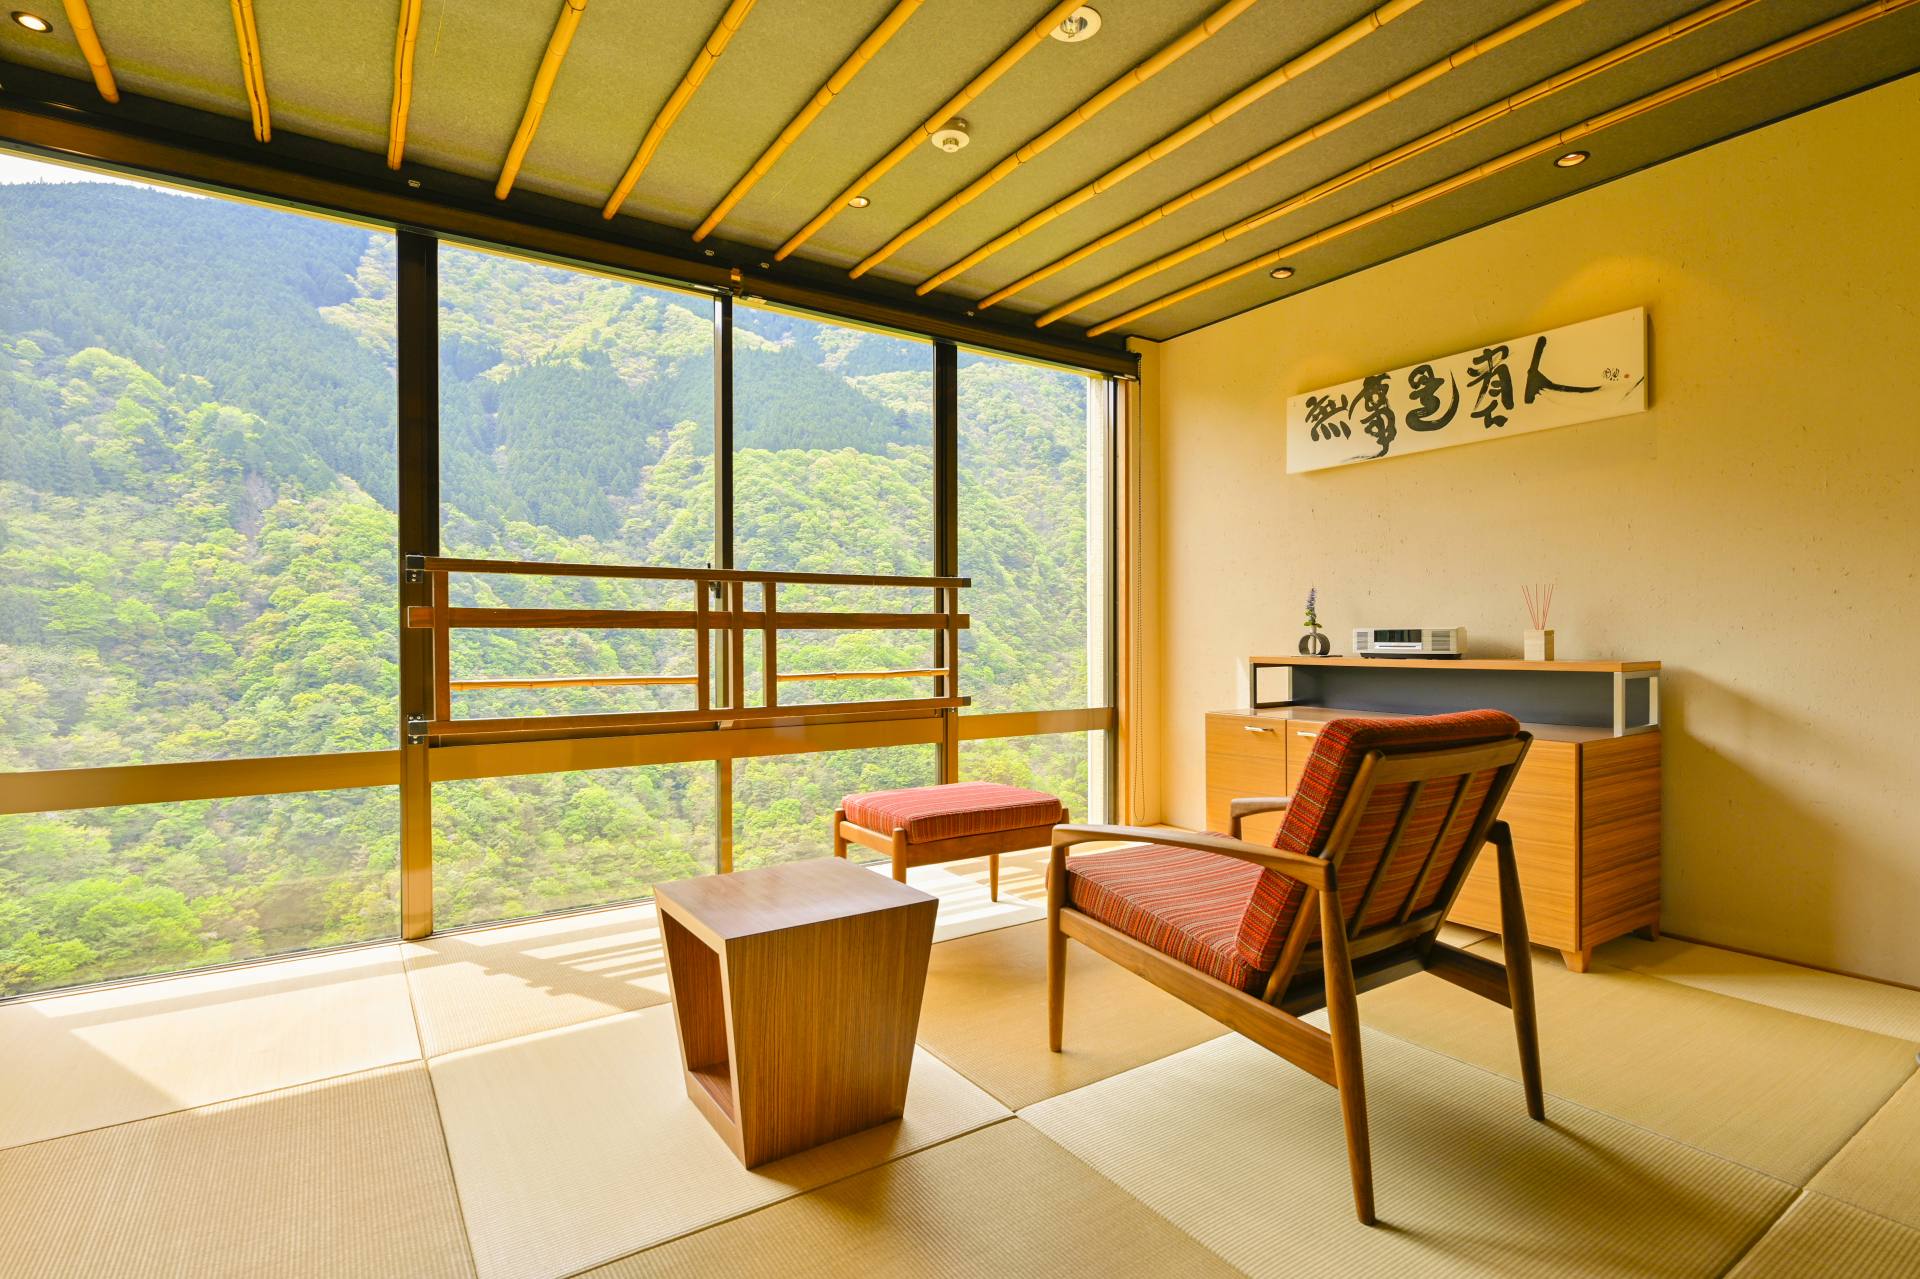 The suite rooms offer a magnificent view of Iya Valley as well.